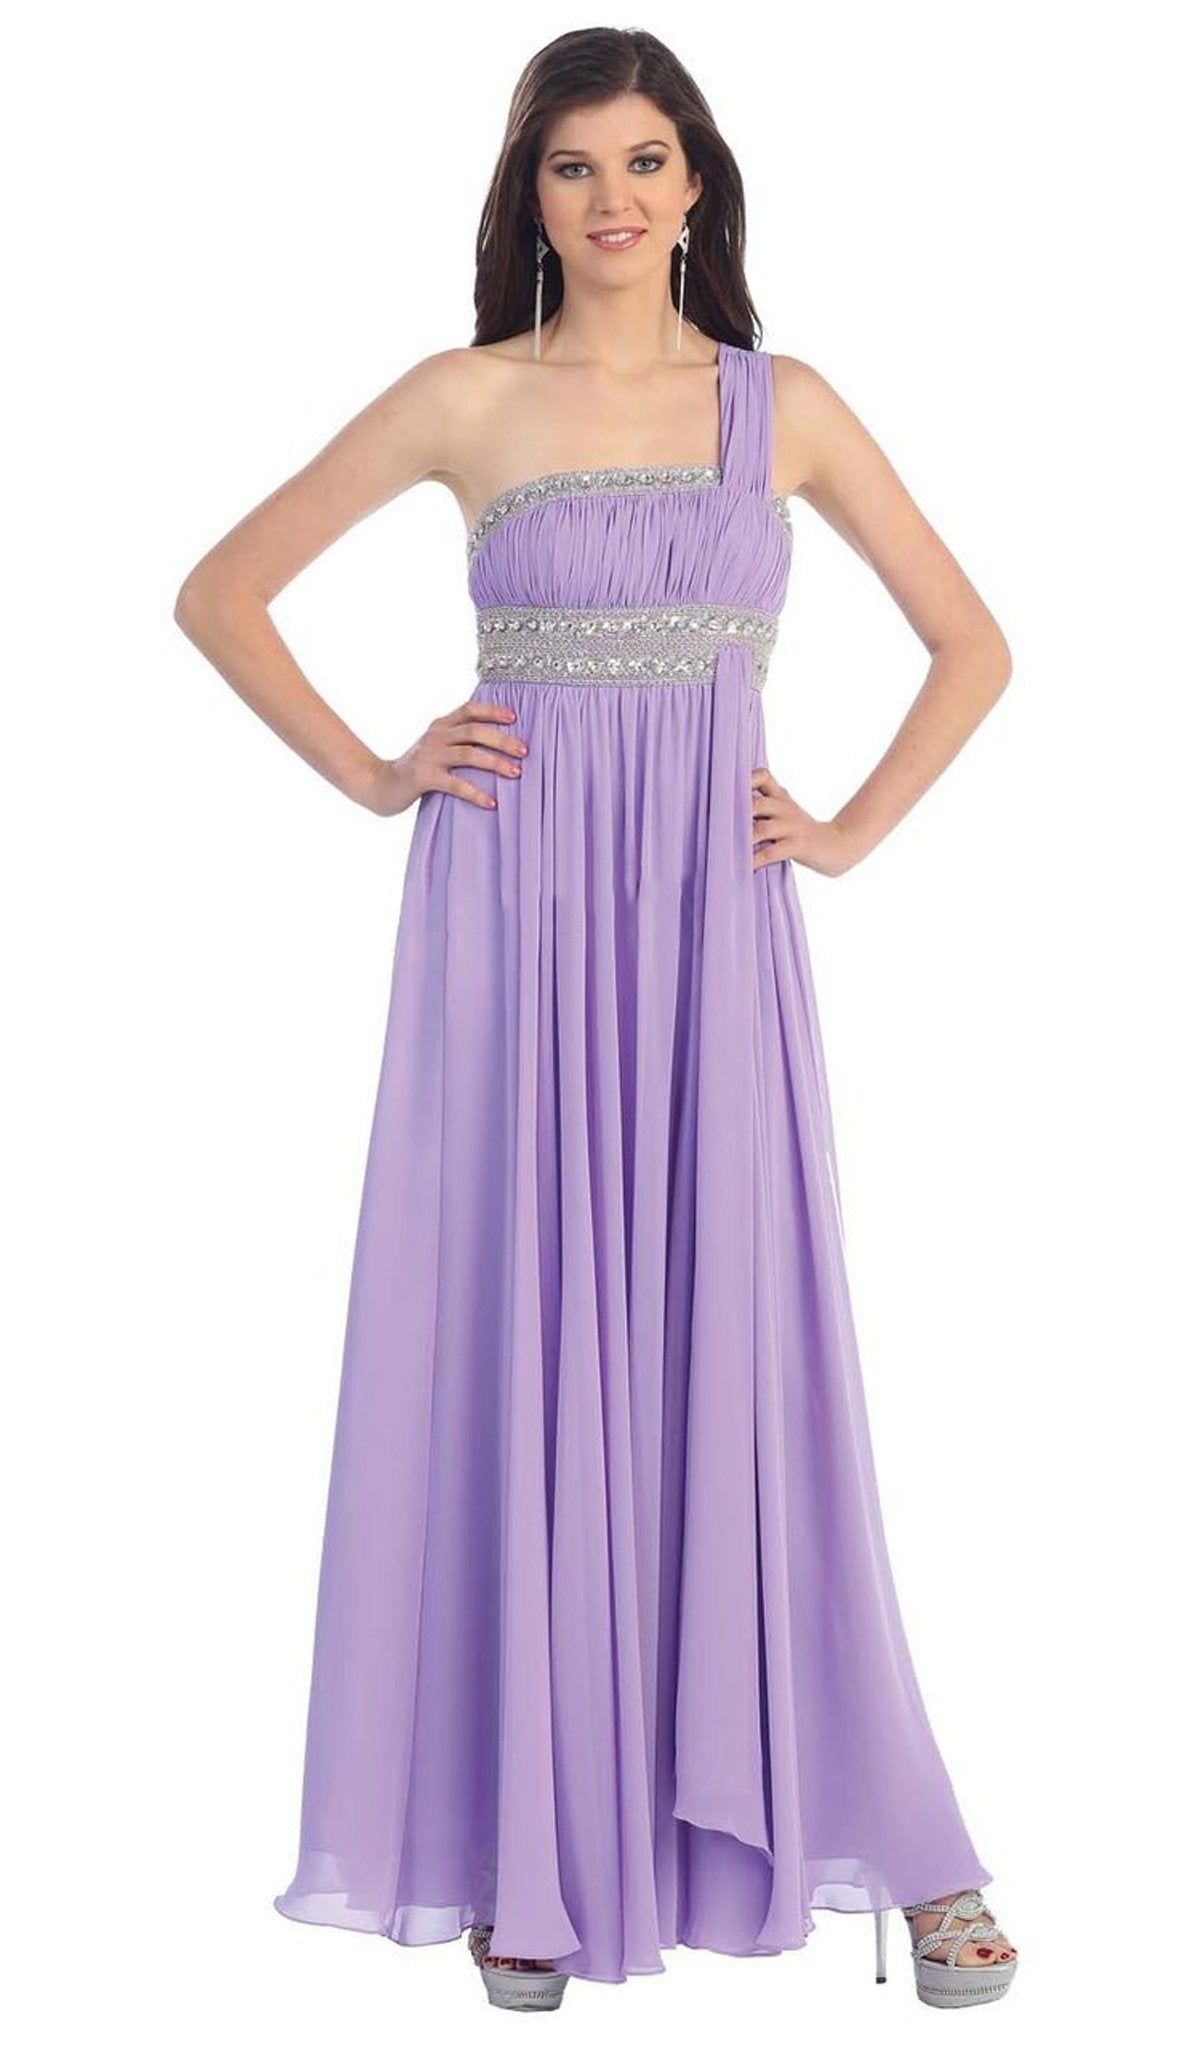 May Queen - MQ748 One Shoulder Strap Bejeweled Straight Neck Chiffon Prom Dress In Purple